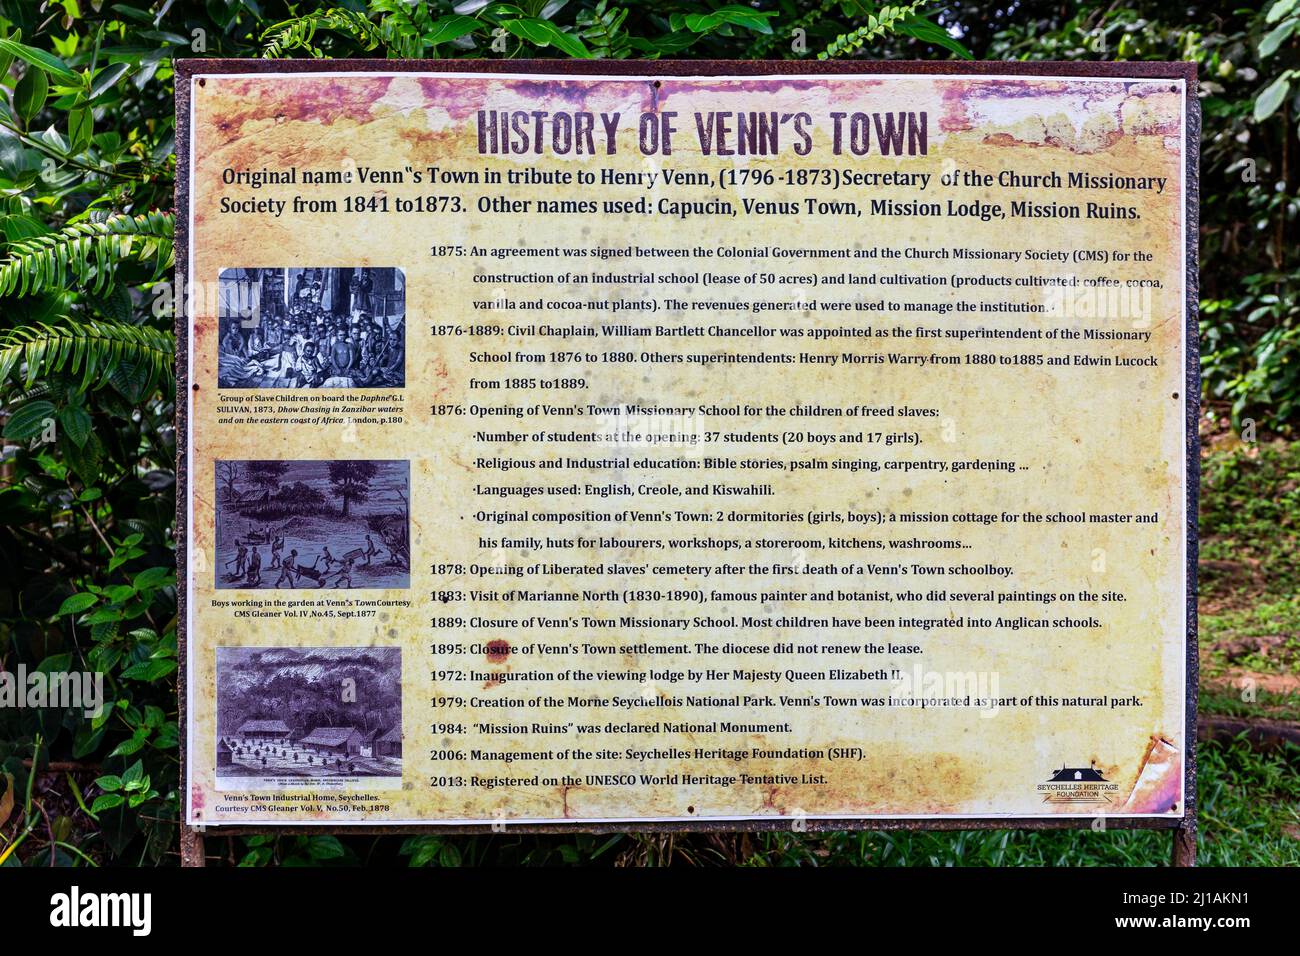 Mahe, Seychelles, 03.05.2021. Venn's Town - Mission Lodge information board with the history of the old missionary school on Mahe Island, Seychelles. Stock Photo